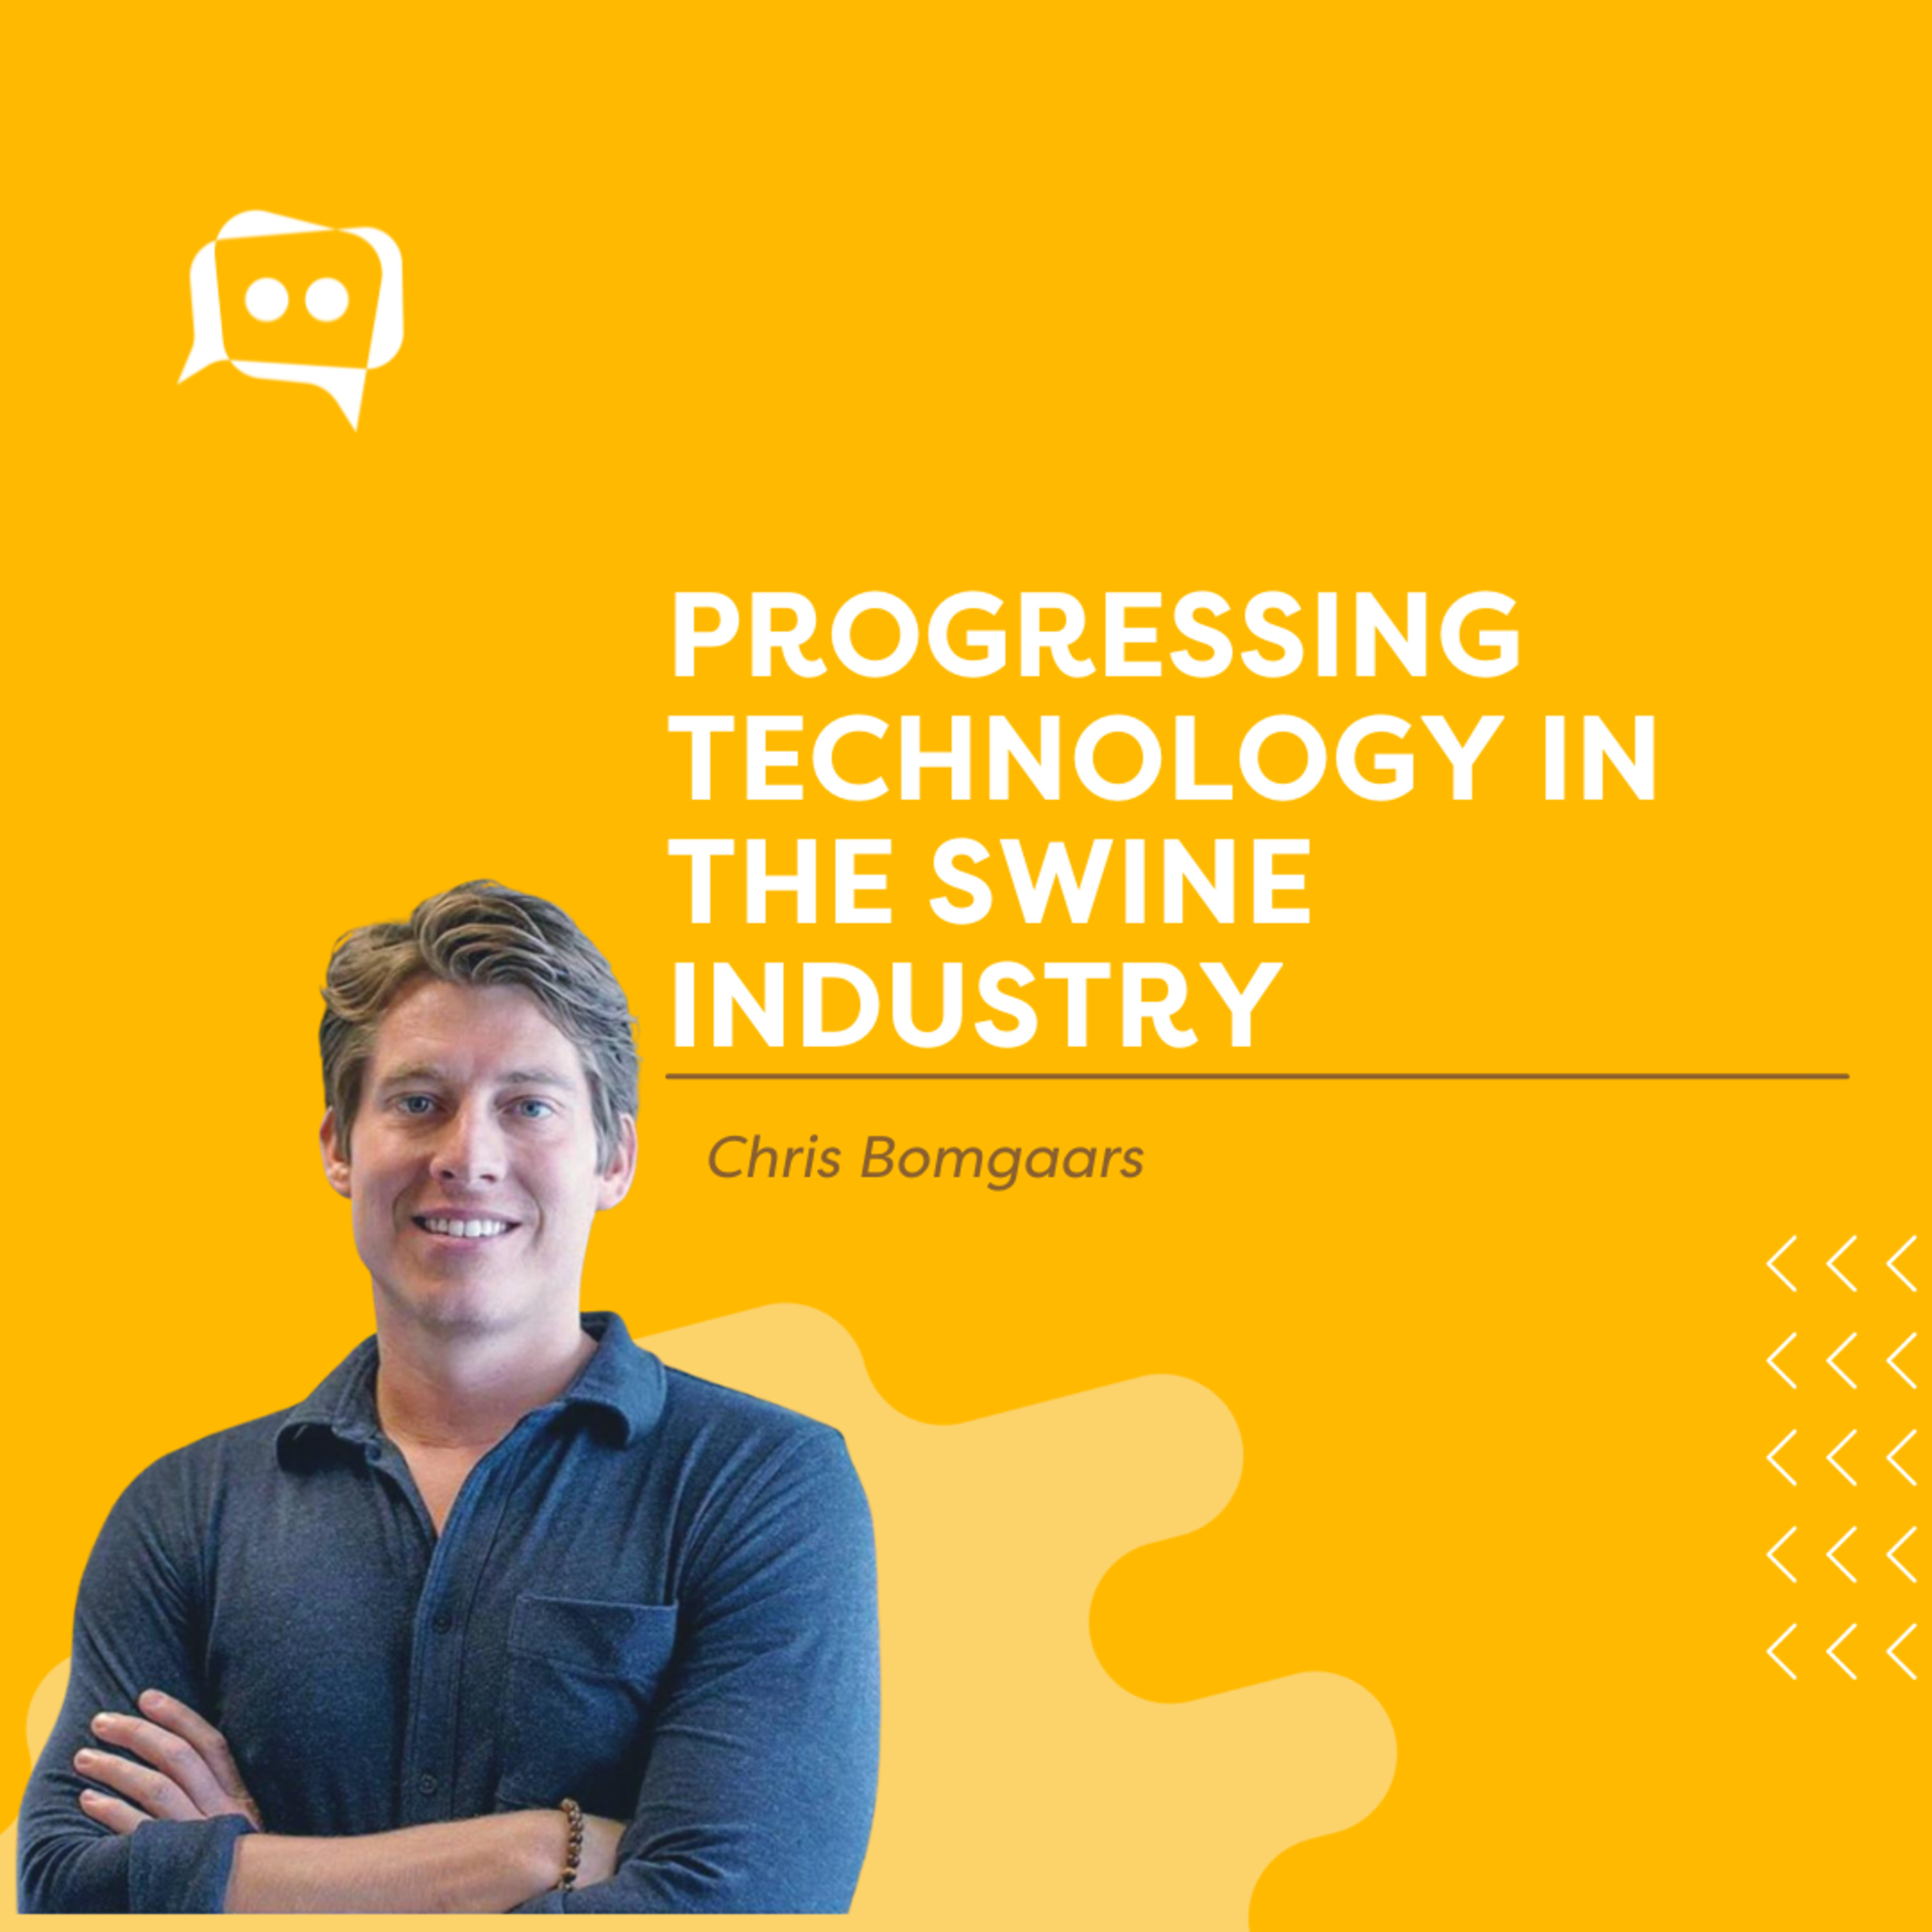 #SHORTS: Progressing technology in the swine industry, with Chris Bomgaars